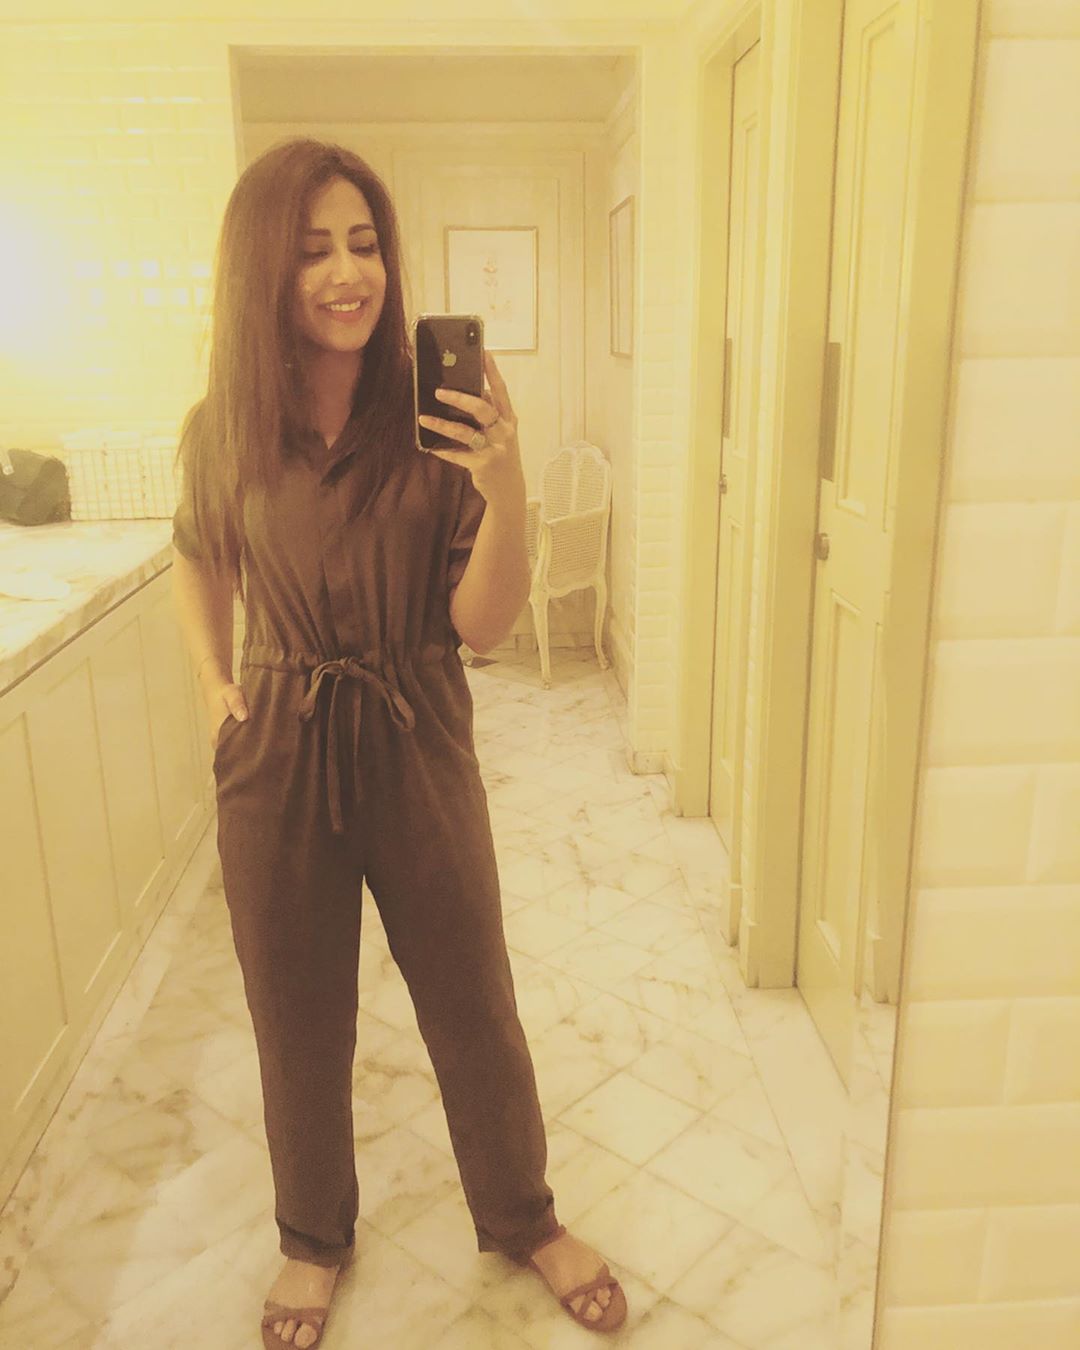 Latest Pictures of Actress Ushna Shah from her Visit to Dubai